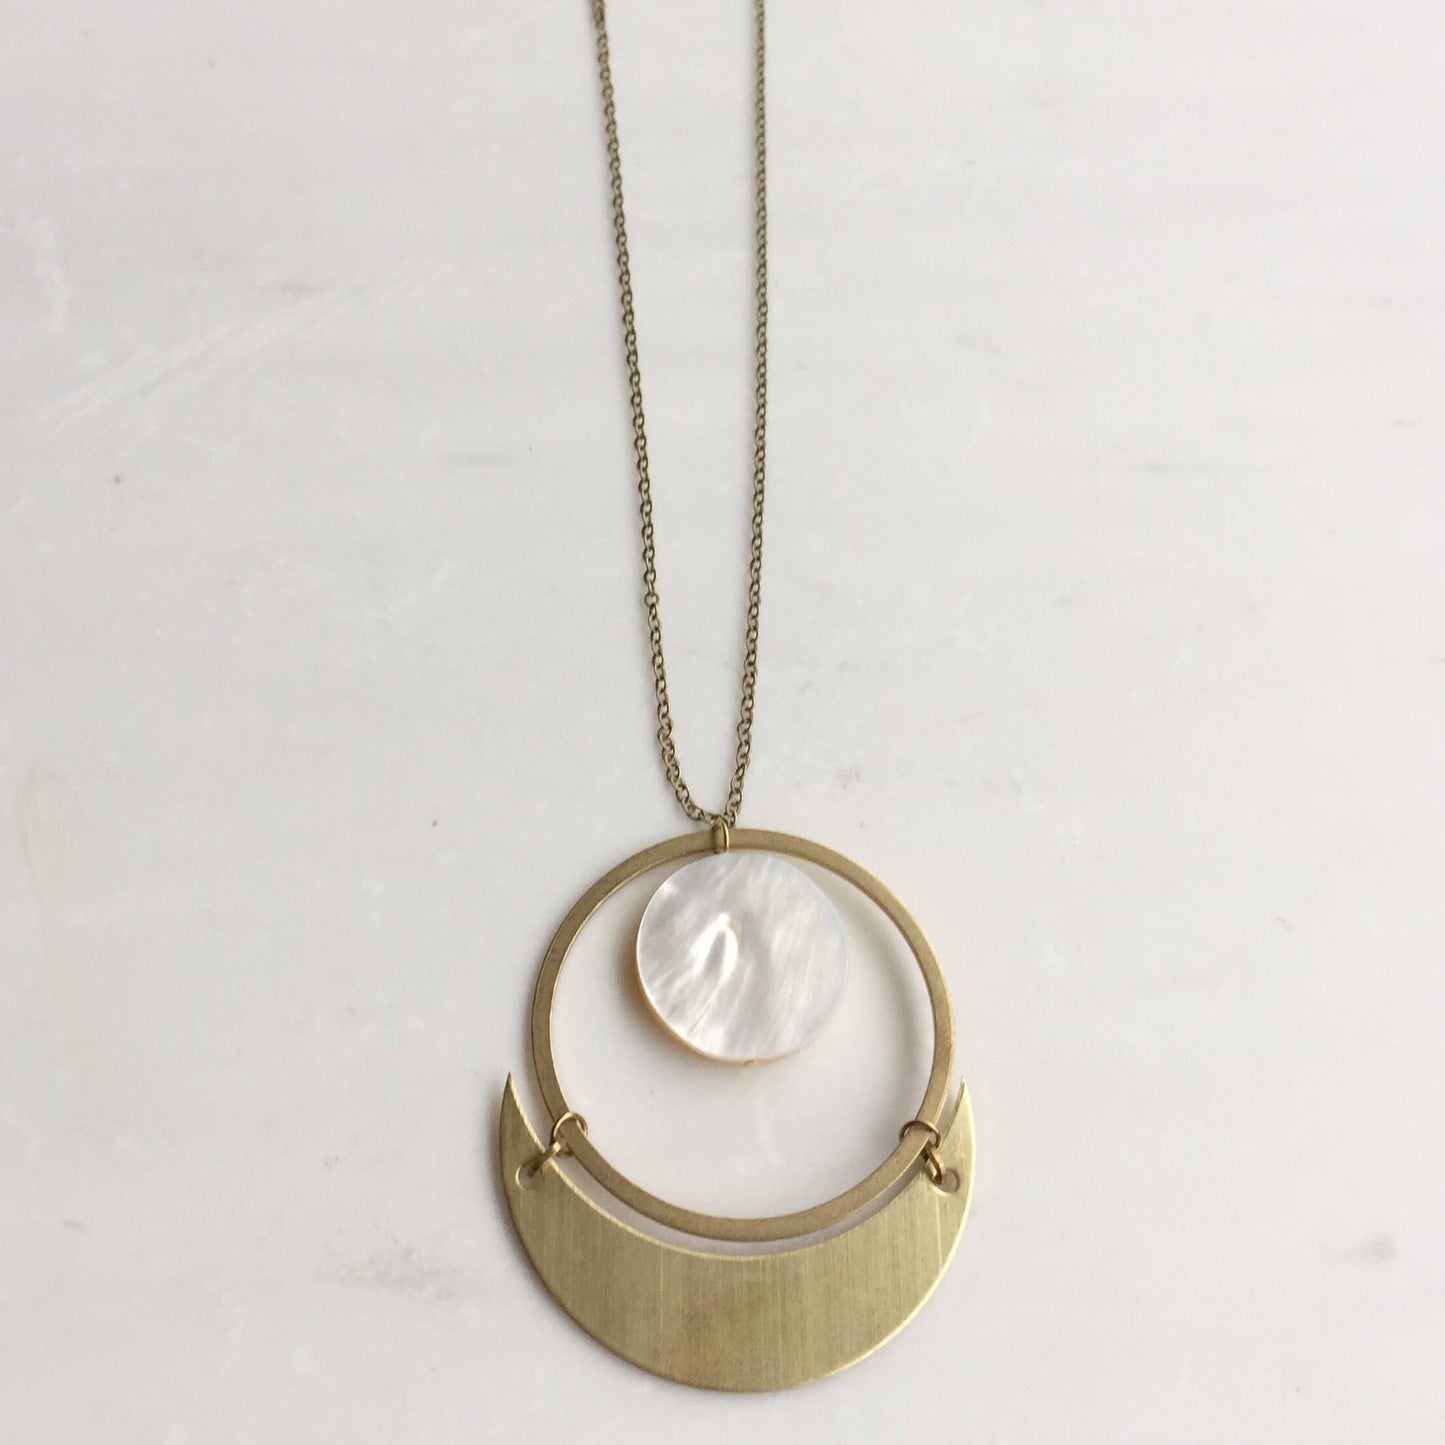 Crescent moon and mother of pearl statement necklace, statement necklace, moon necklace, mother of pearl gold necklace, gift for her